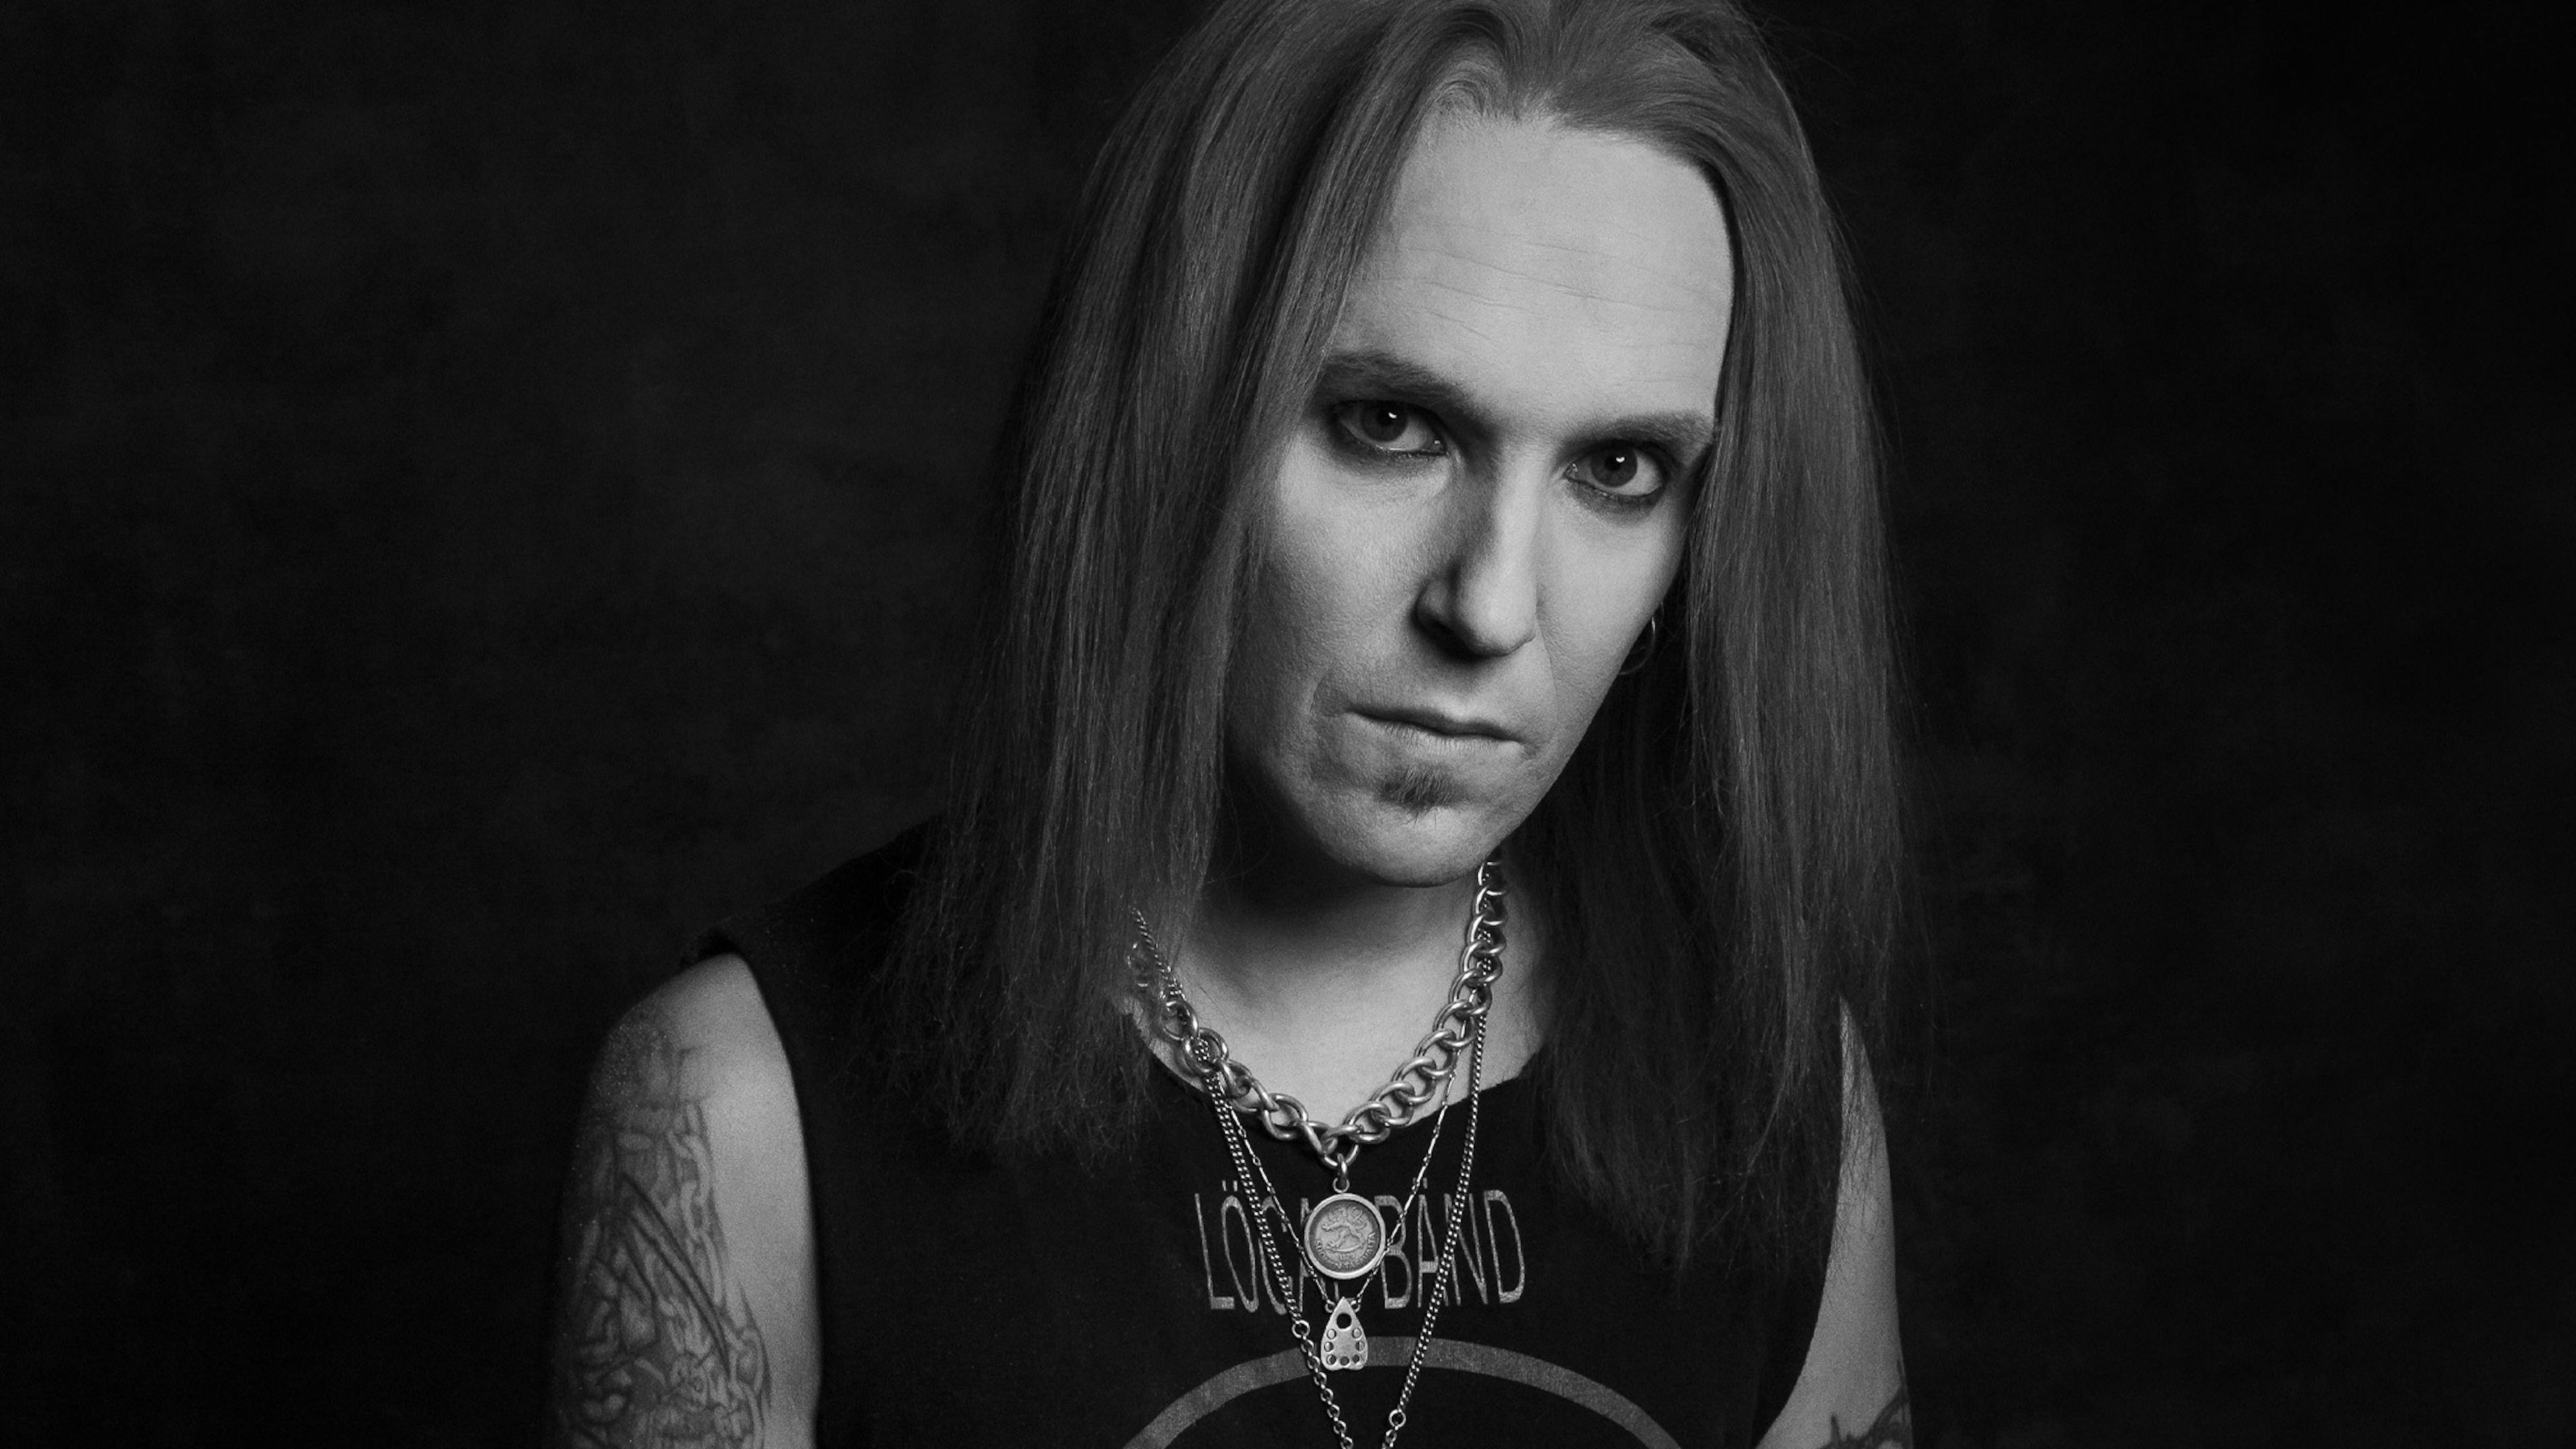 "We are all human, we all suffer, but help is out there": Alexi Laiho's legal widow shares moving message with official cause of death